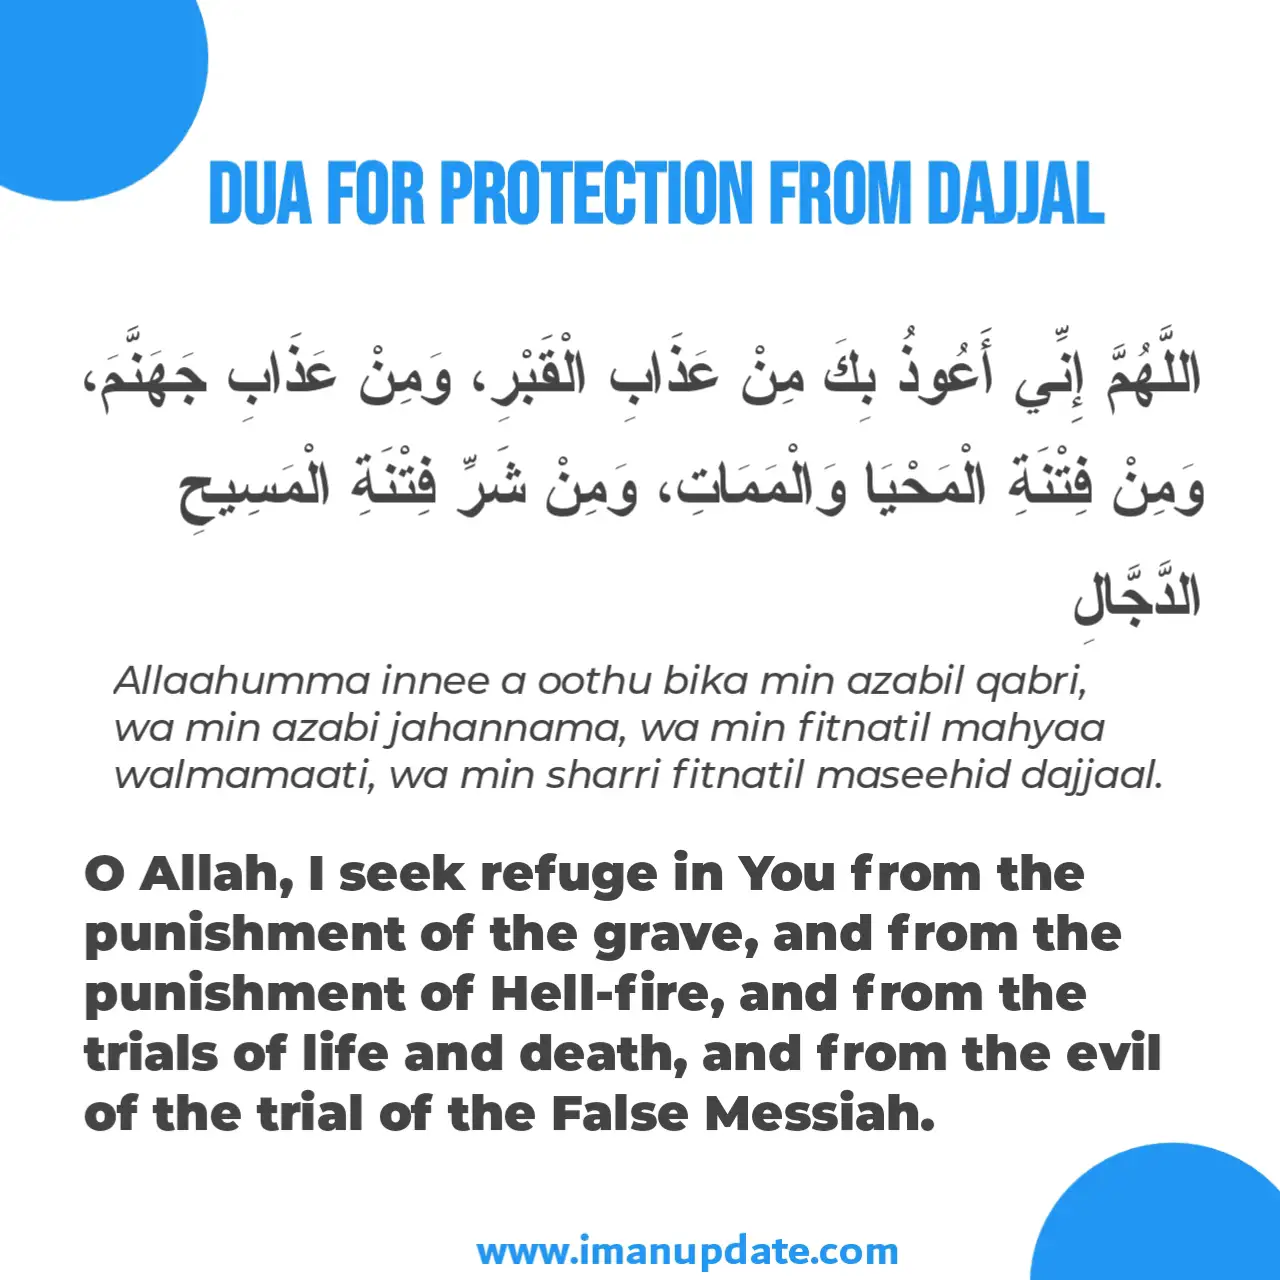 Dua For Protection From Dajjal